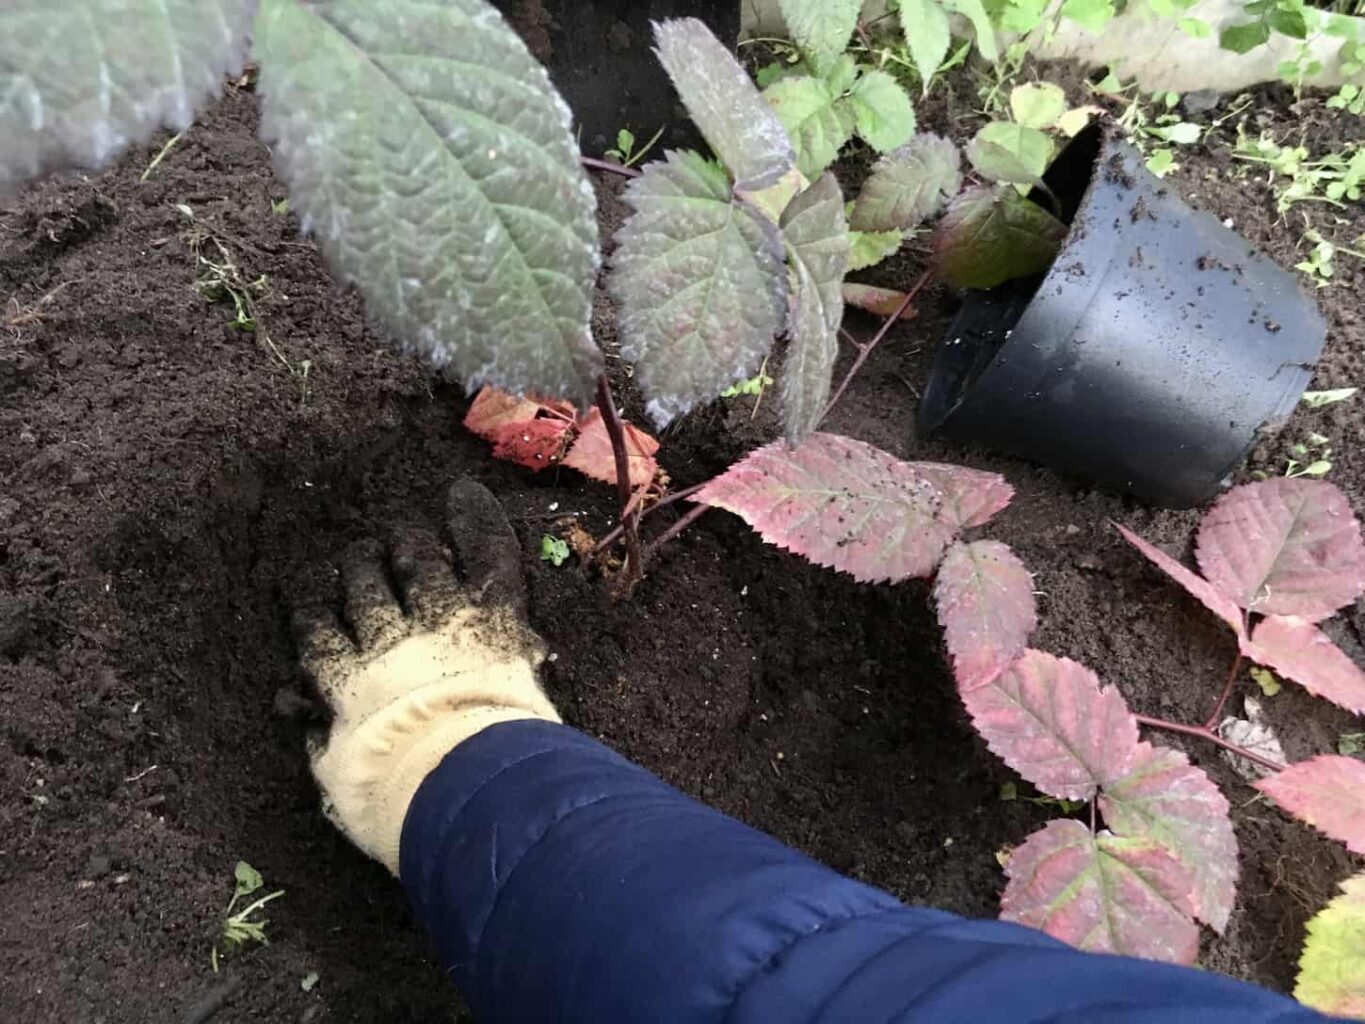 An image of a gardener planting raspberry and blackberry seedlings in the garden bed.